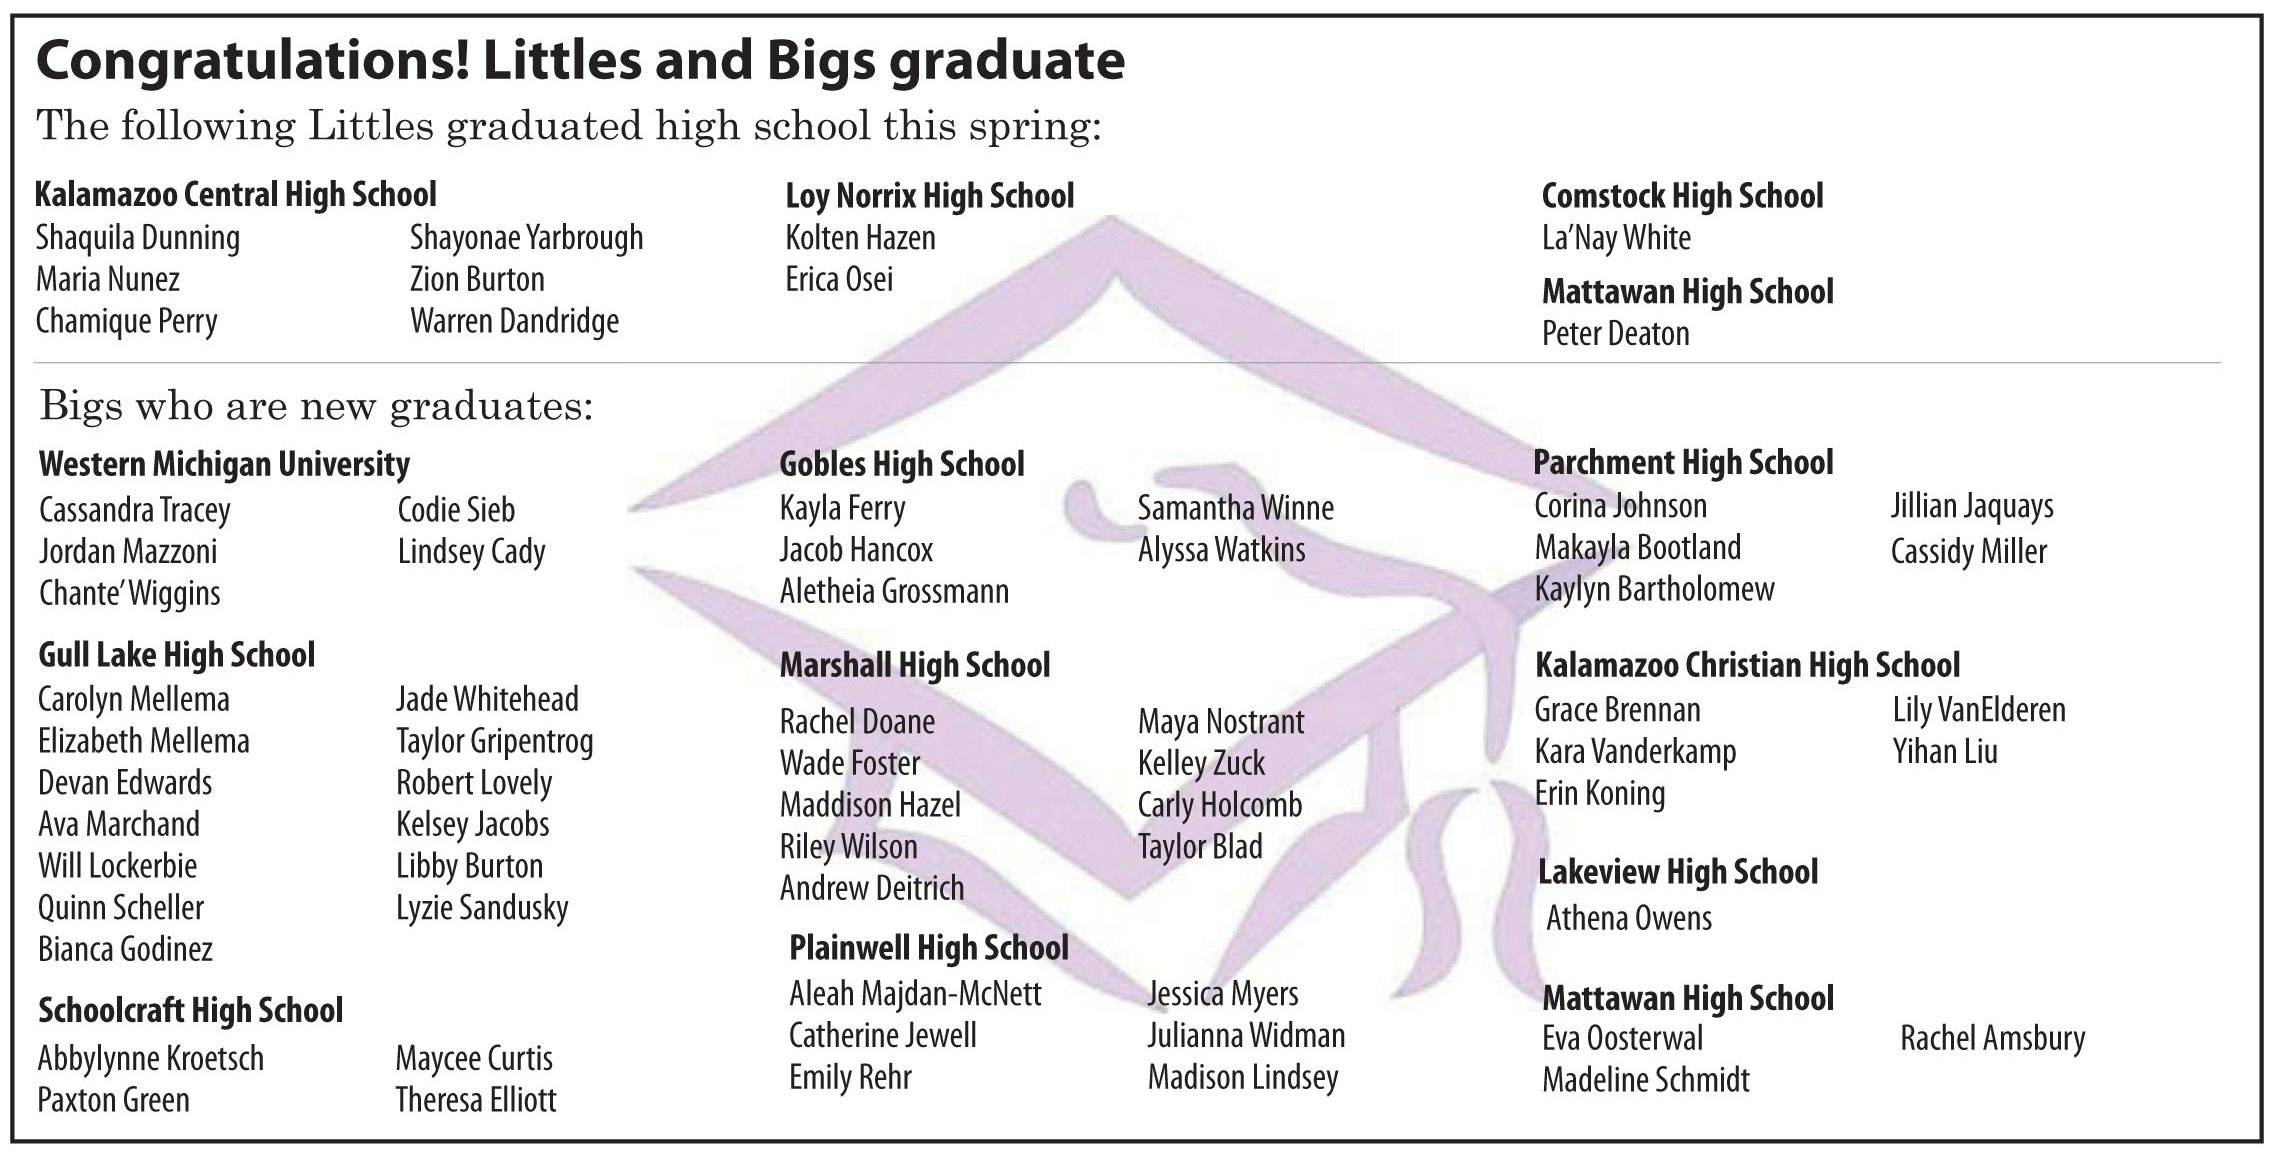 High School Bigs featured in Marshall newspaper